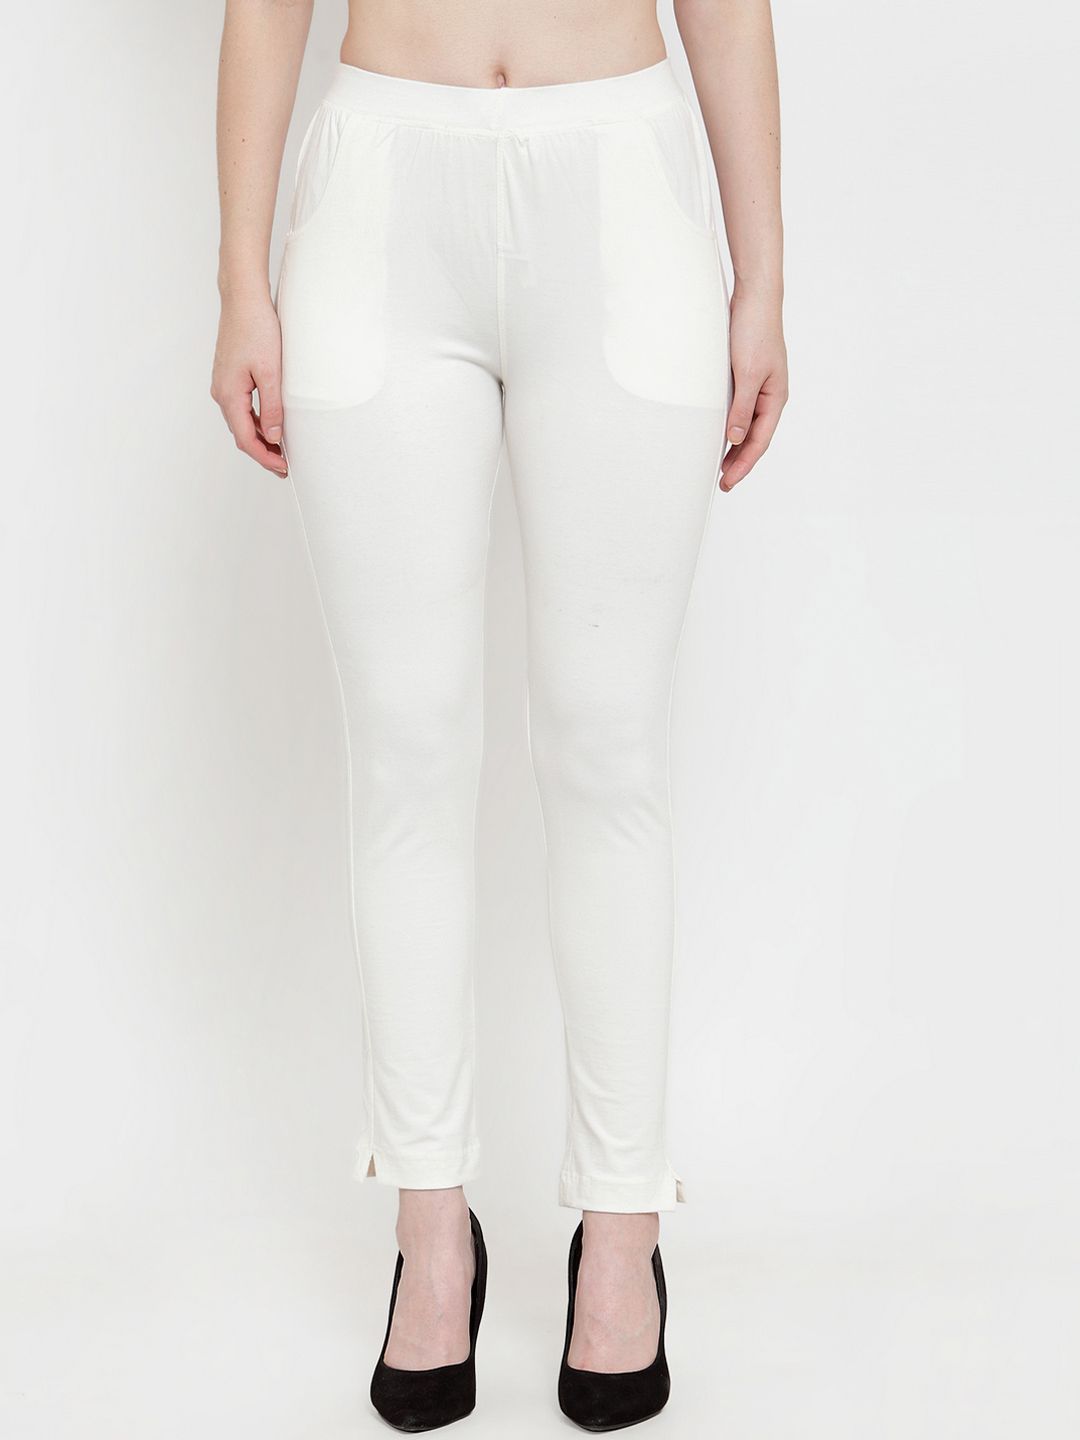 TAG 7 Women Off White Solid Ankle-Length Leggings Price in India